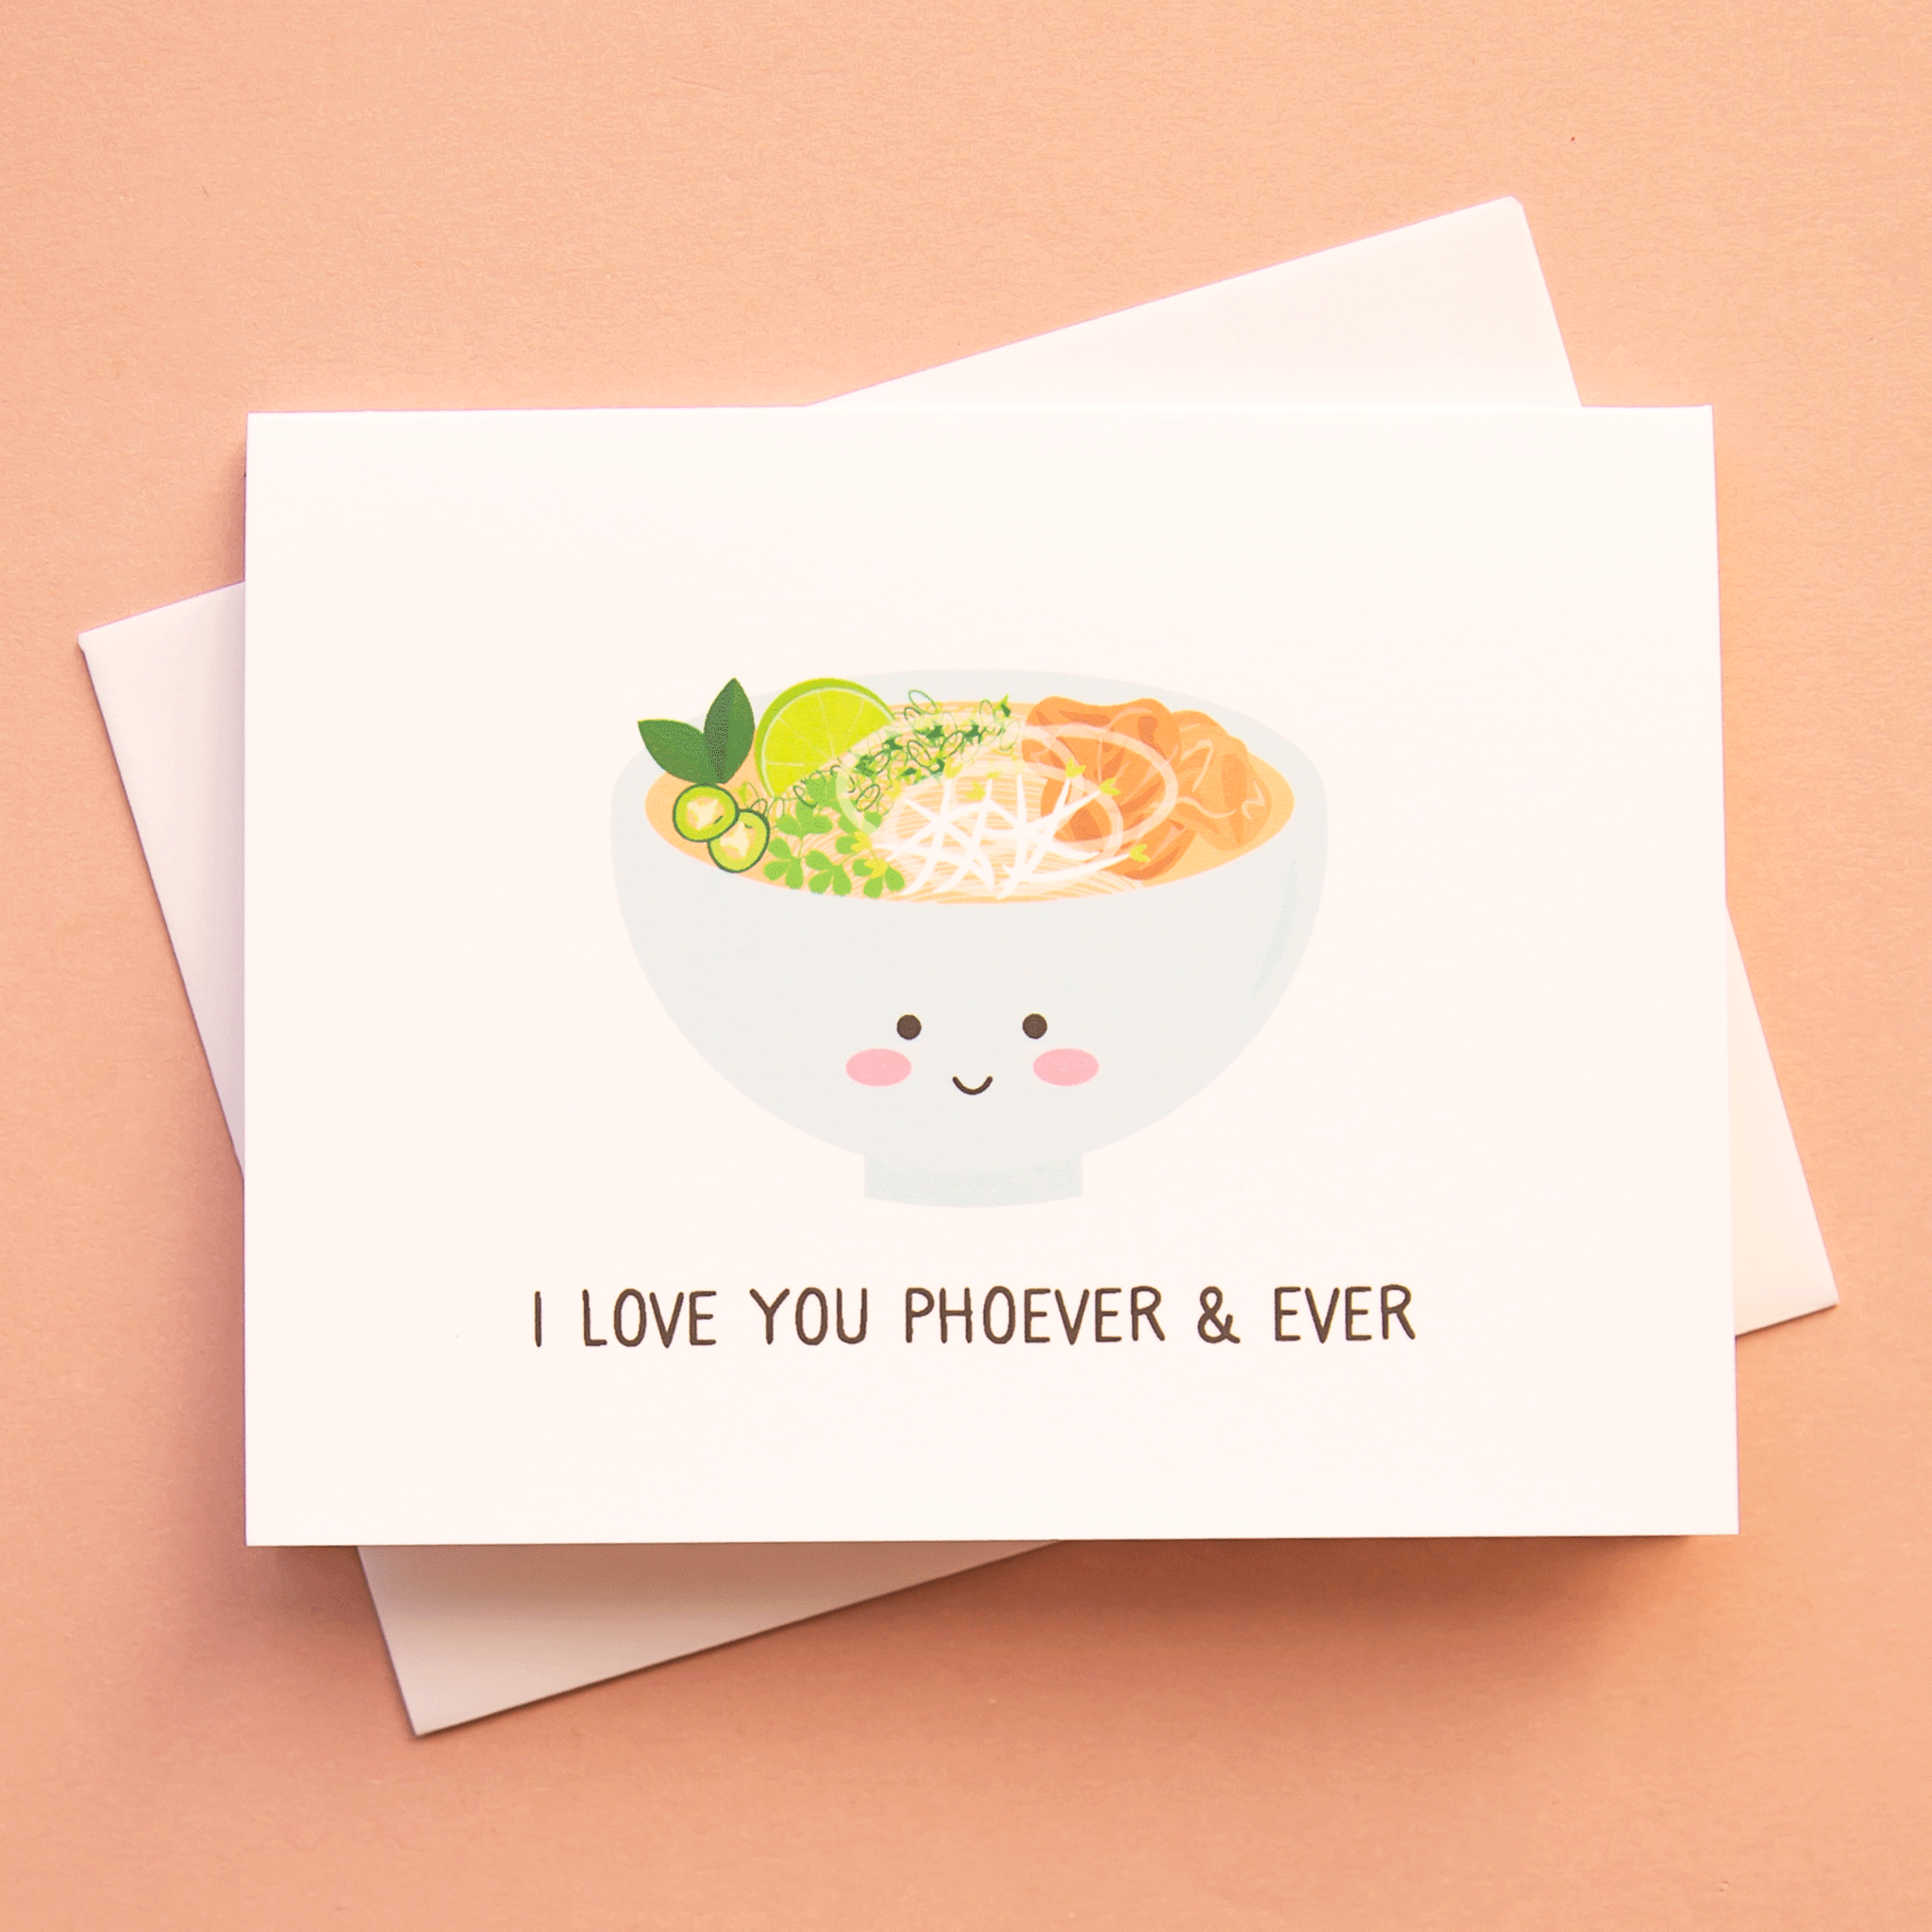 A white card with a colorful bowl of pho in a light blue bowl that has a smiling face and text underneath that reads, "I Love You Phoever & Ever" in black letters.